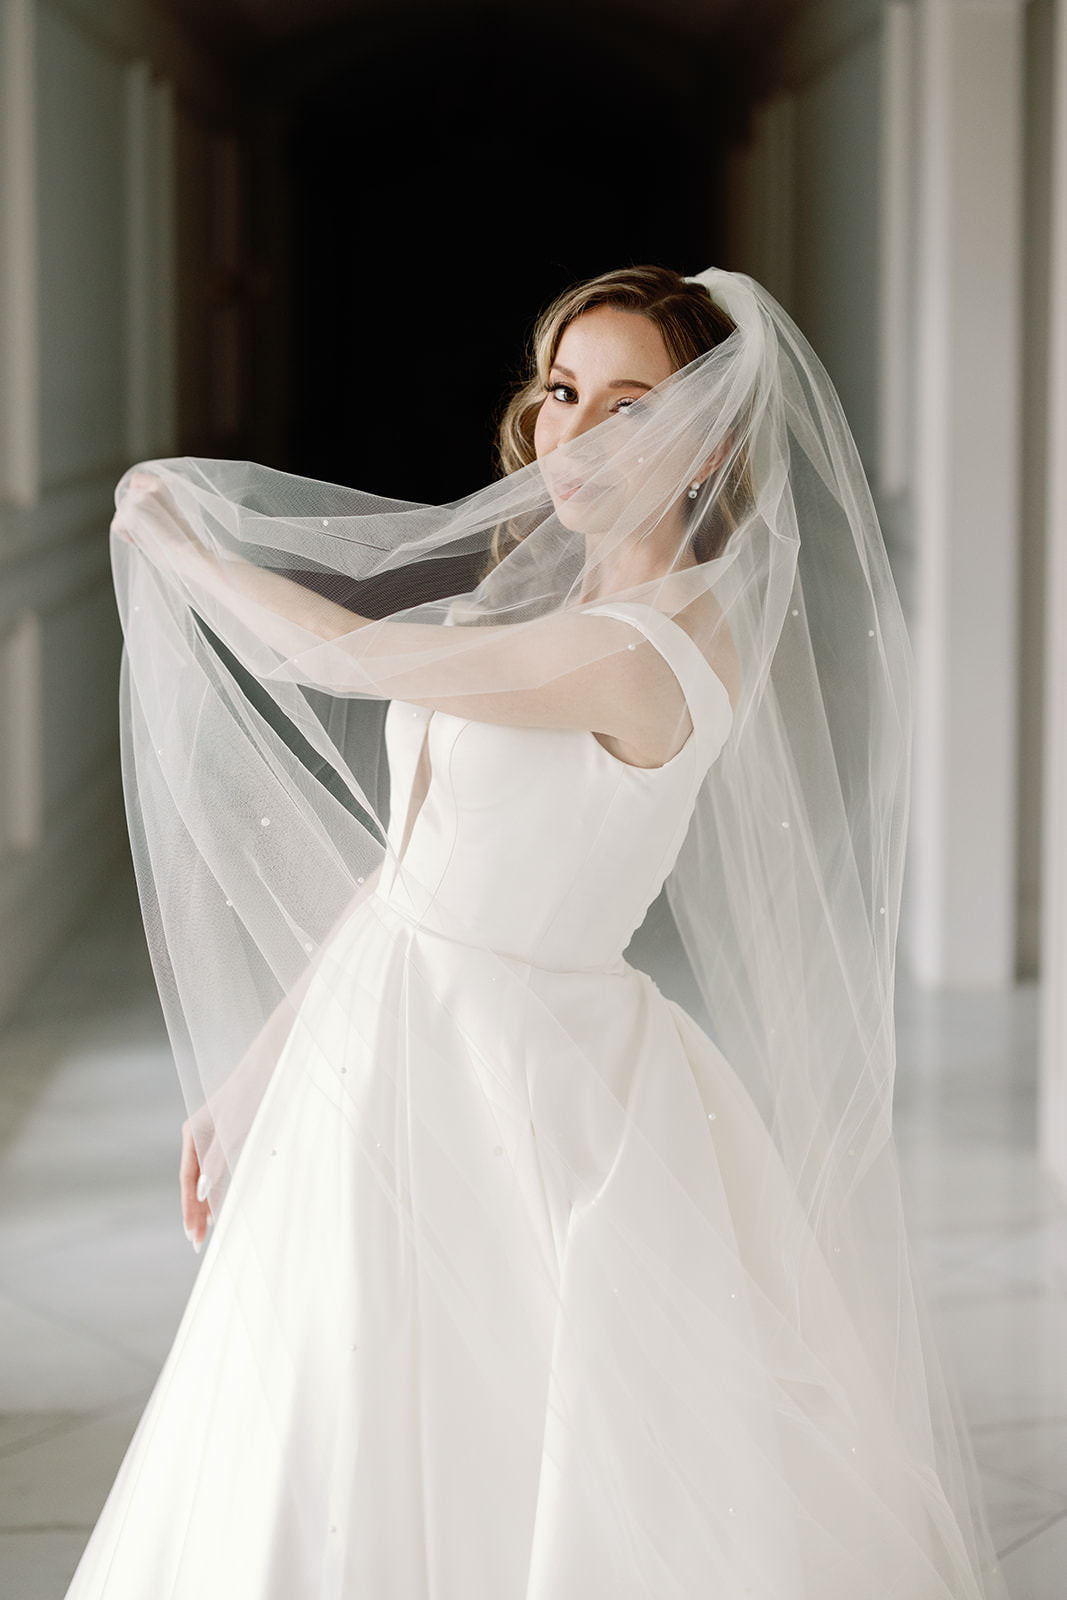 Cathedral Pearl Veil to Wear With Wedding Dress